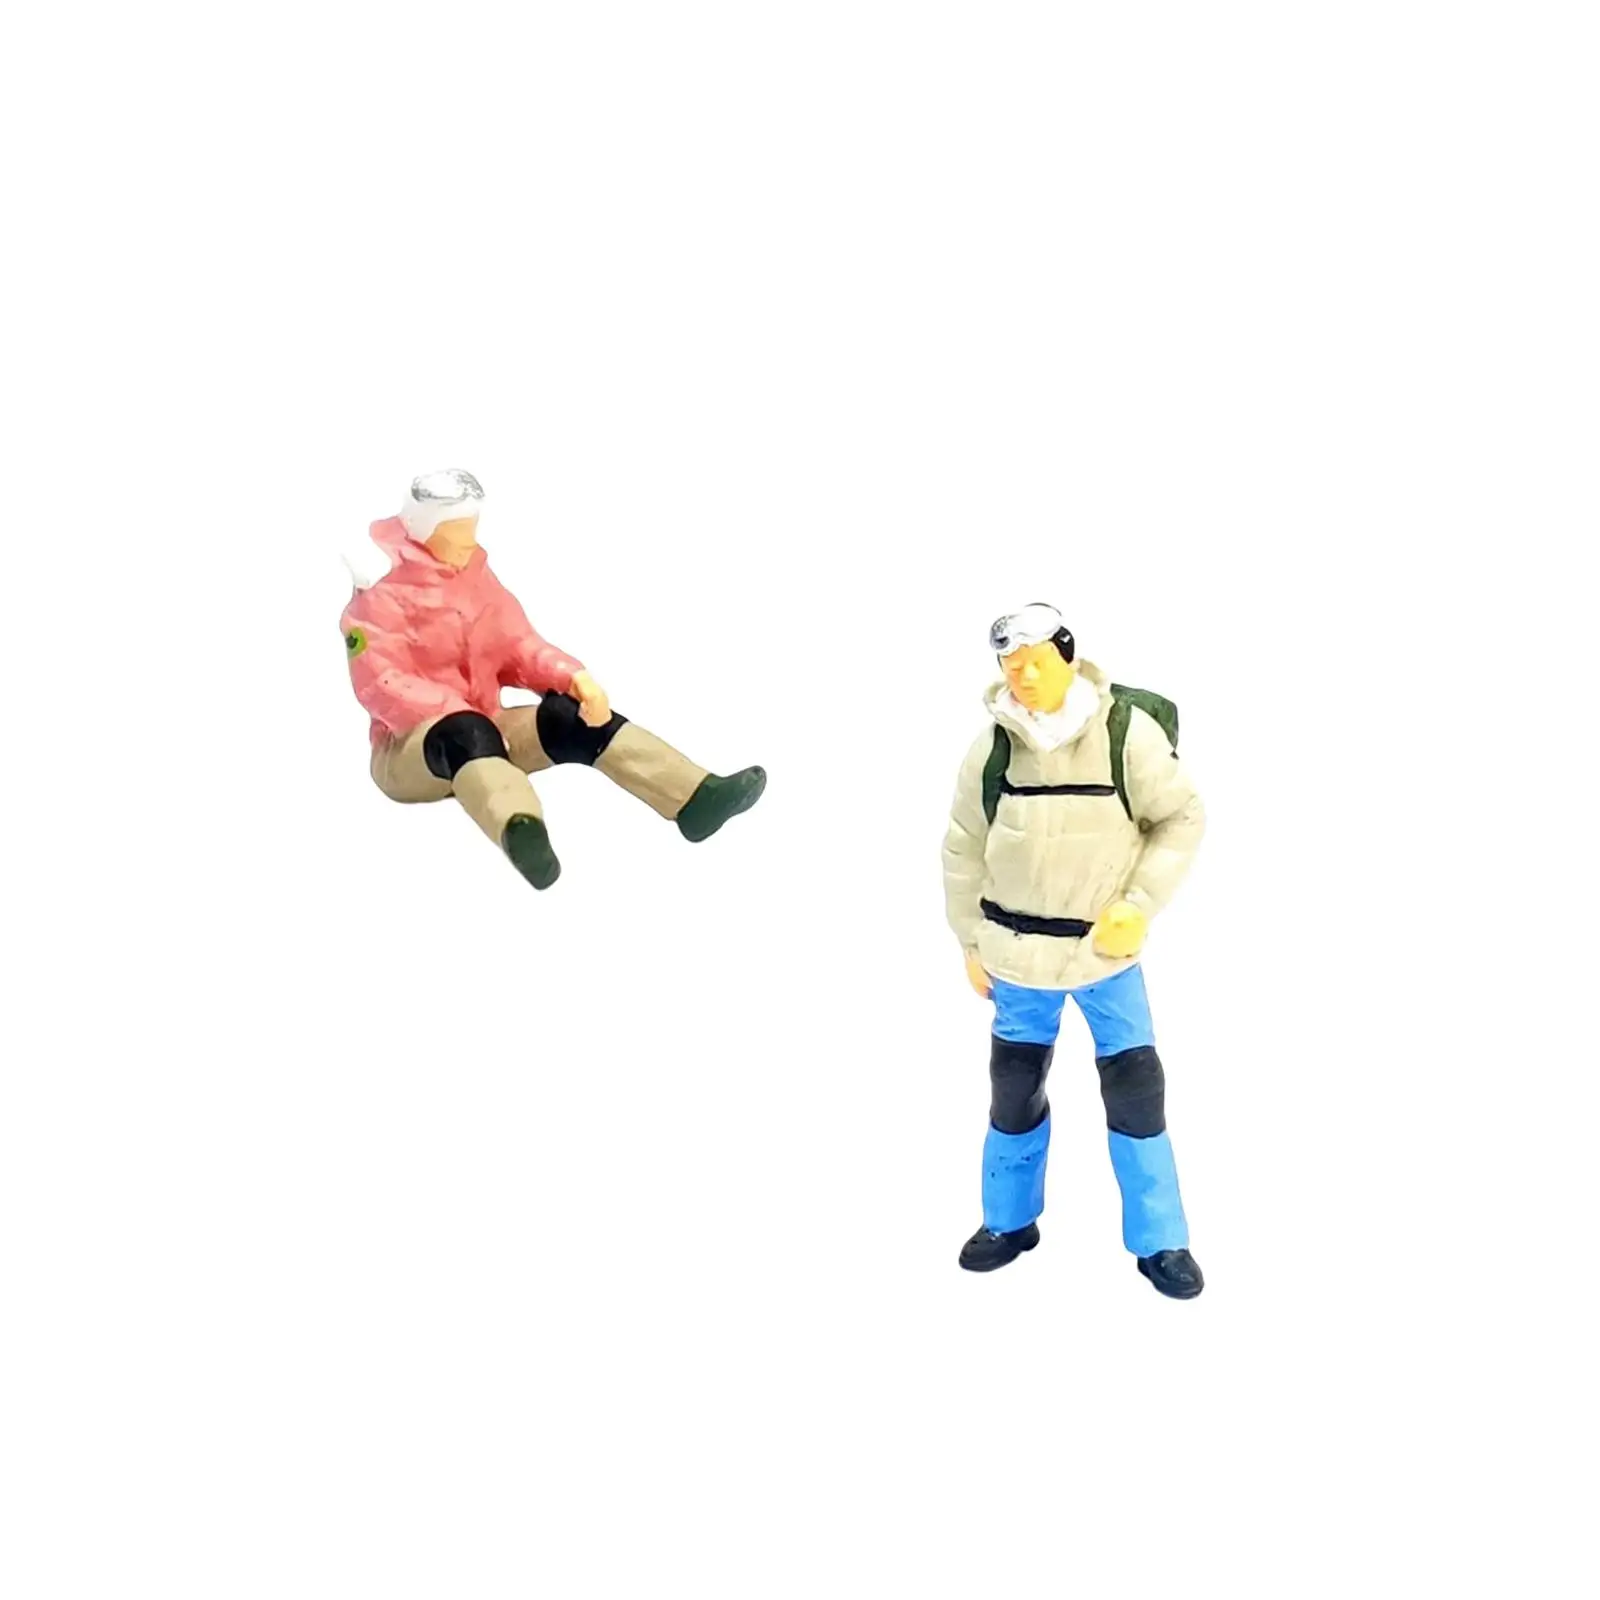 2x Sporting Painted Figures Tiny People Toys Miniature Scene People for Dollhouse DIY Projects